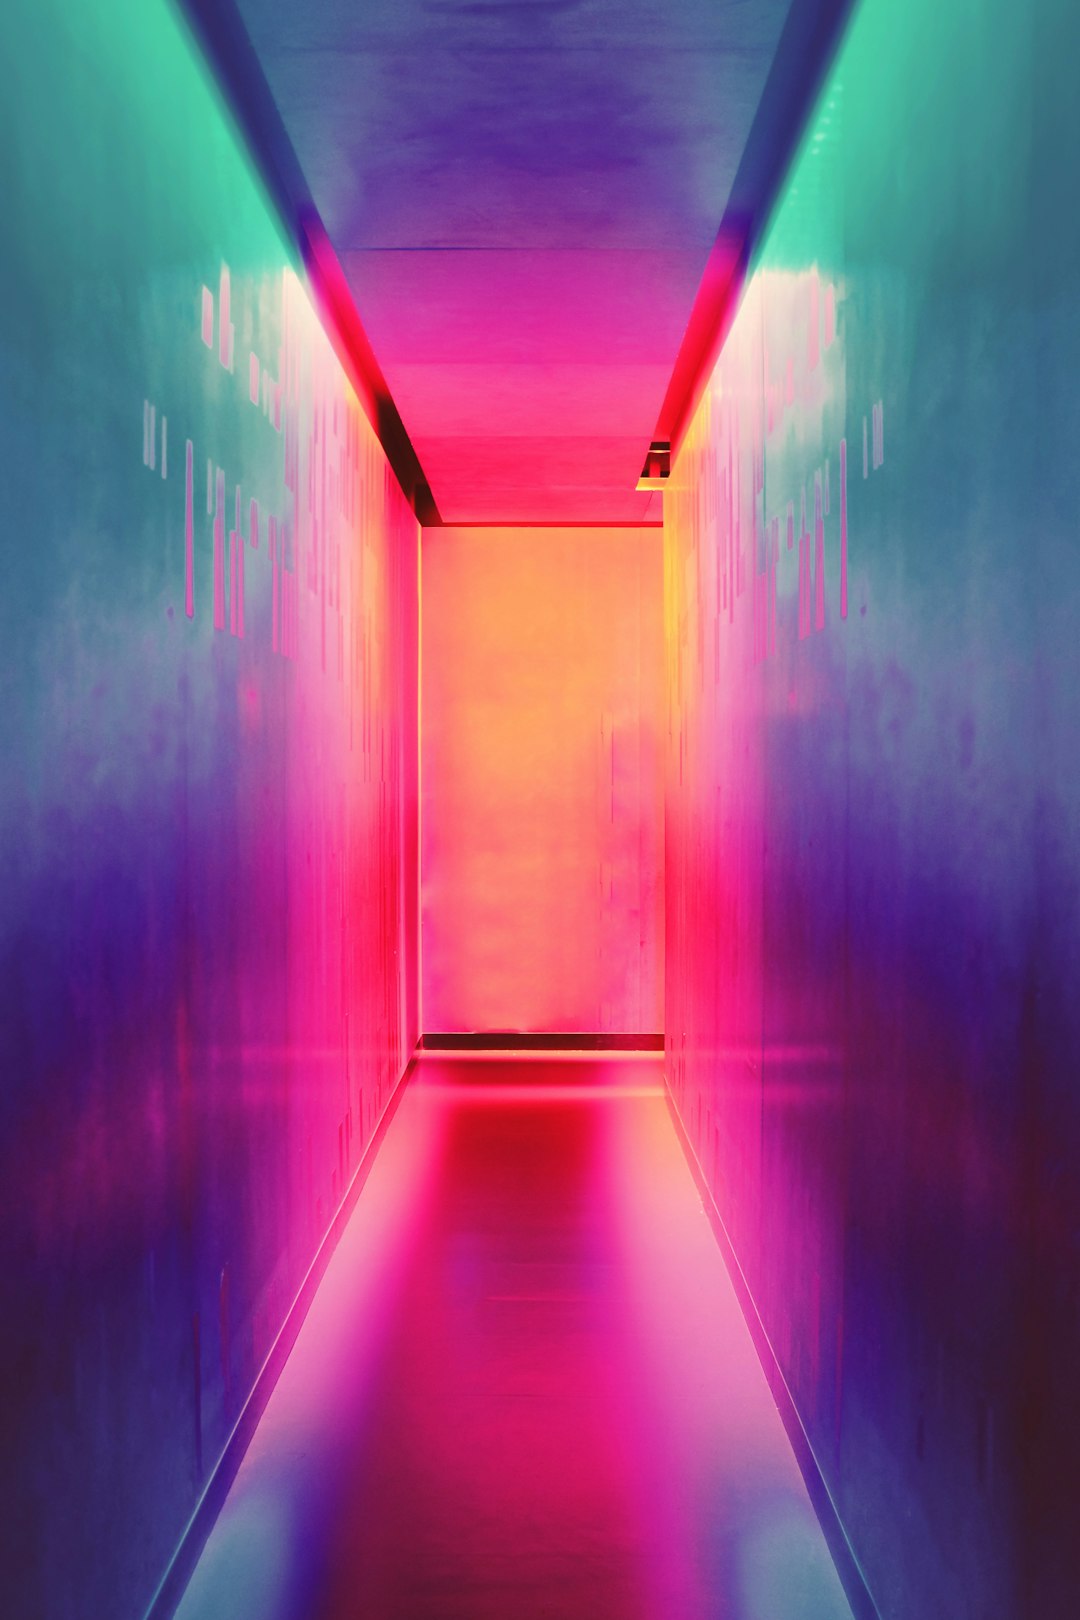 A long, narrow hallway with walls painted in vibrant neon colors, creating an atmosphere of energy and excitement. The dynamic lighting casts soft shadows on the floor, adding to its futuristic vibe. In front of you lies another door leading into another world.